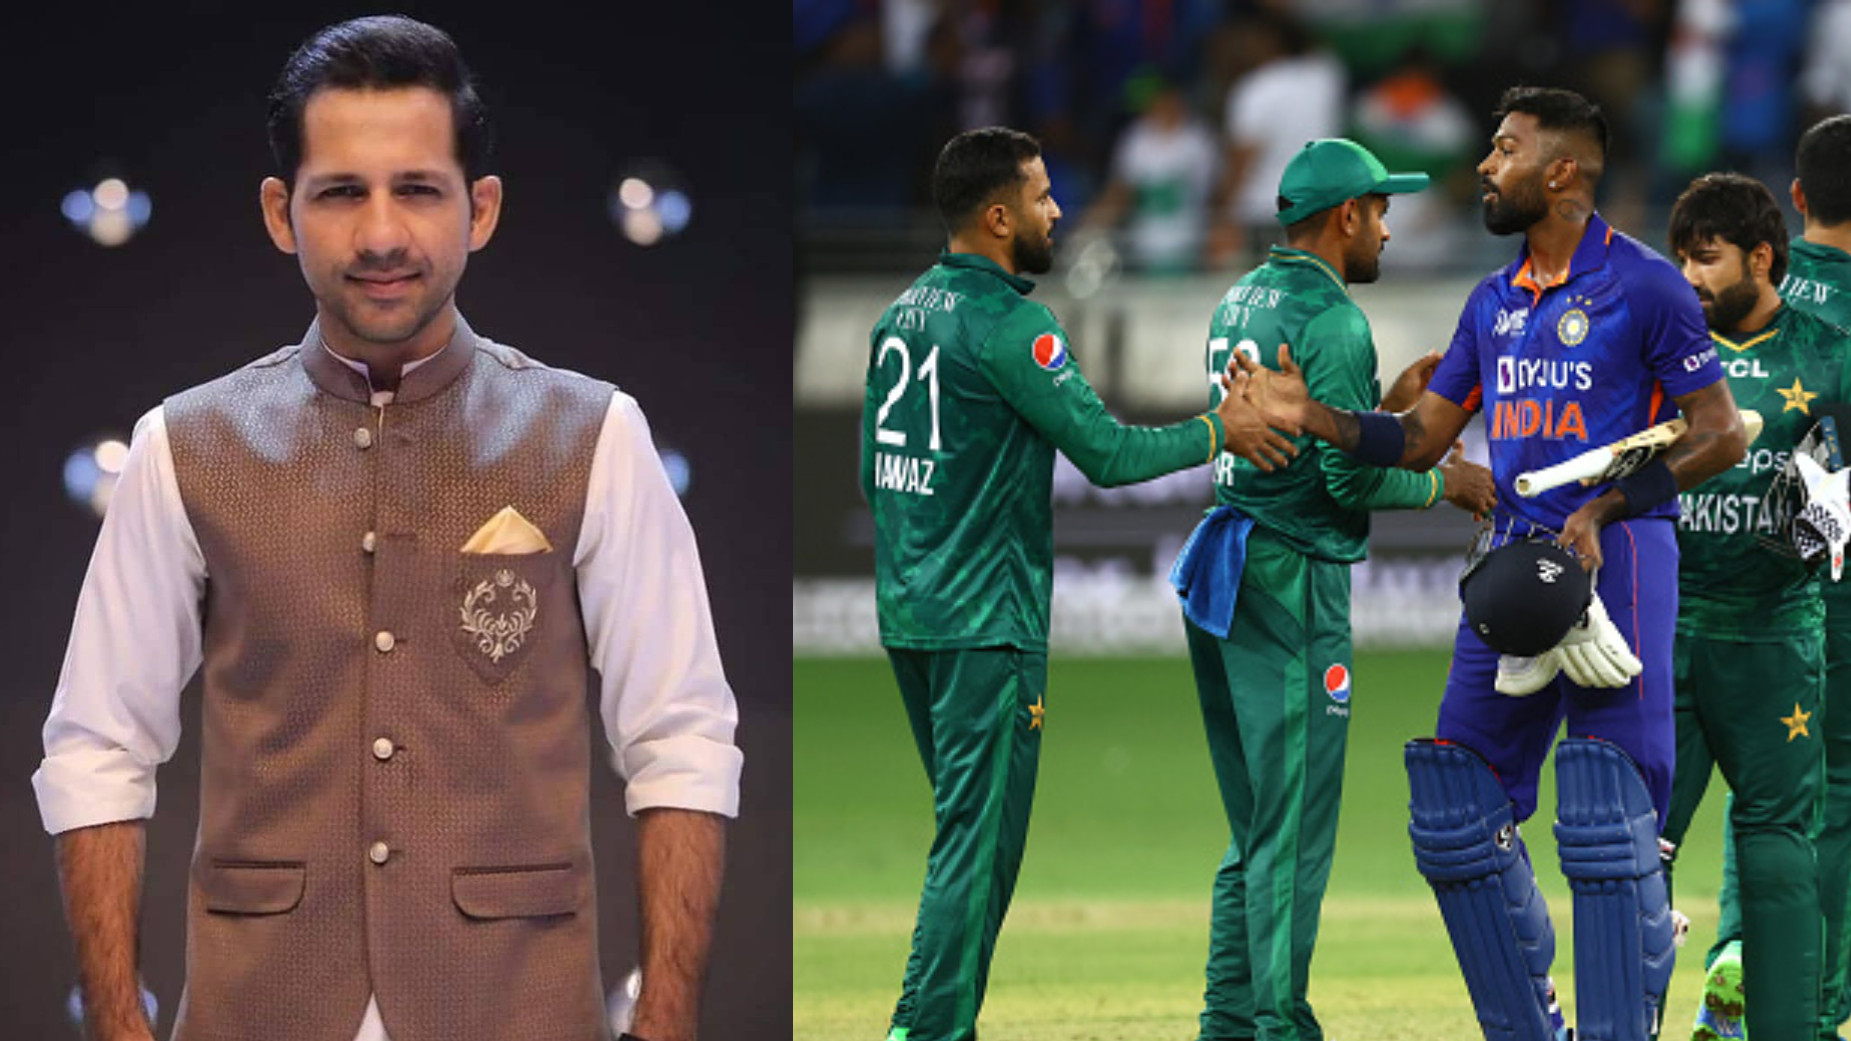 Asia Cup 2022: Sarfaraz Ahmed sparks controversy for his ‘female journalist’ remark after Pakistan's loss to India